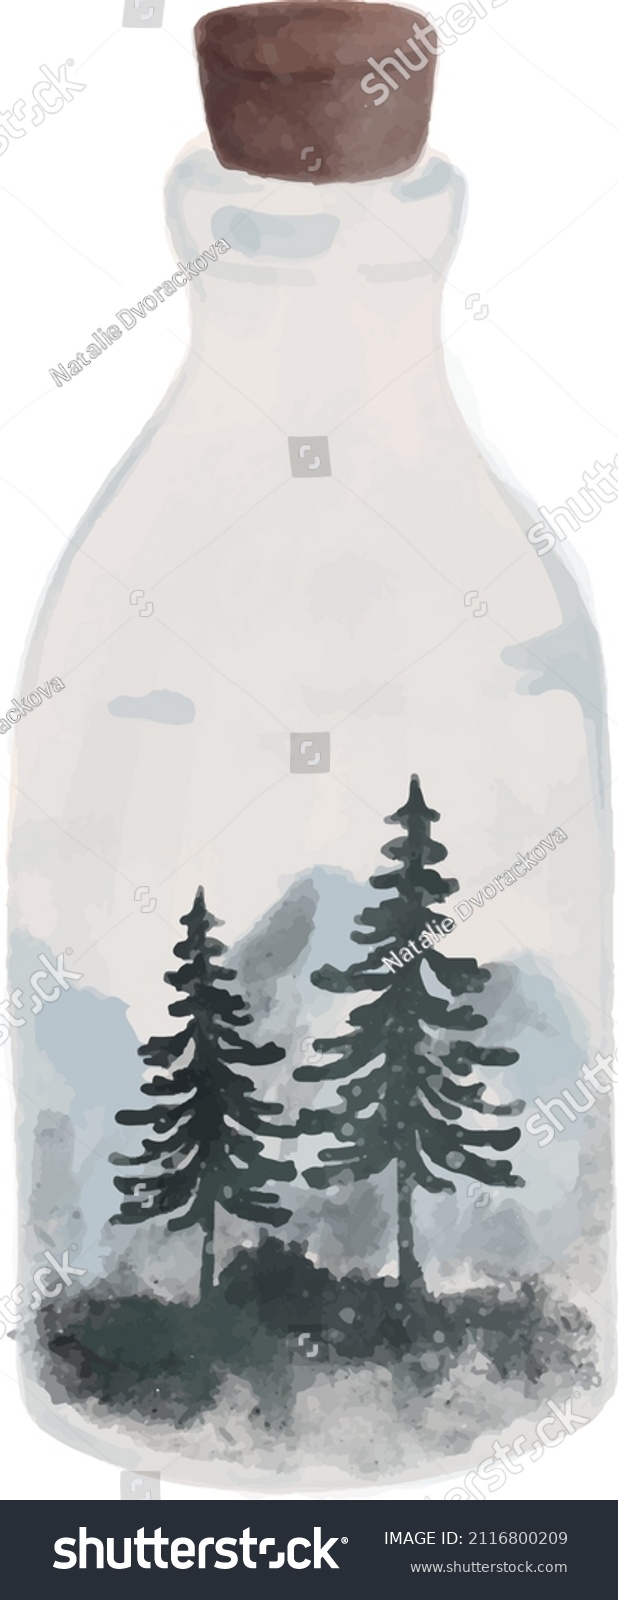 Handpainted watercolor vector illustration of mountains and forrest in a bottle. Ideal for print, graphic design, collage, stickers, scrapbooking, web and other creative projects. #2116800209